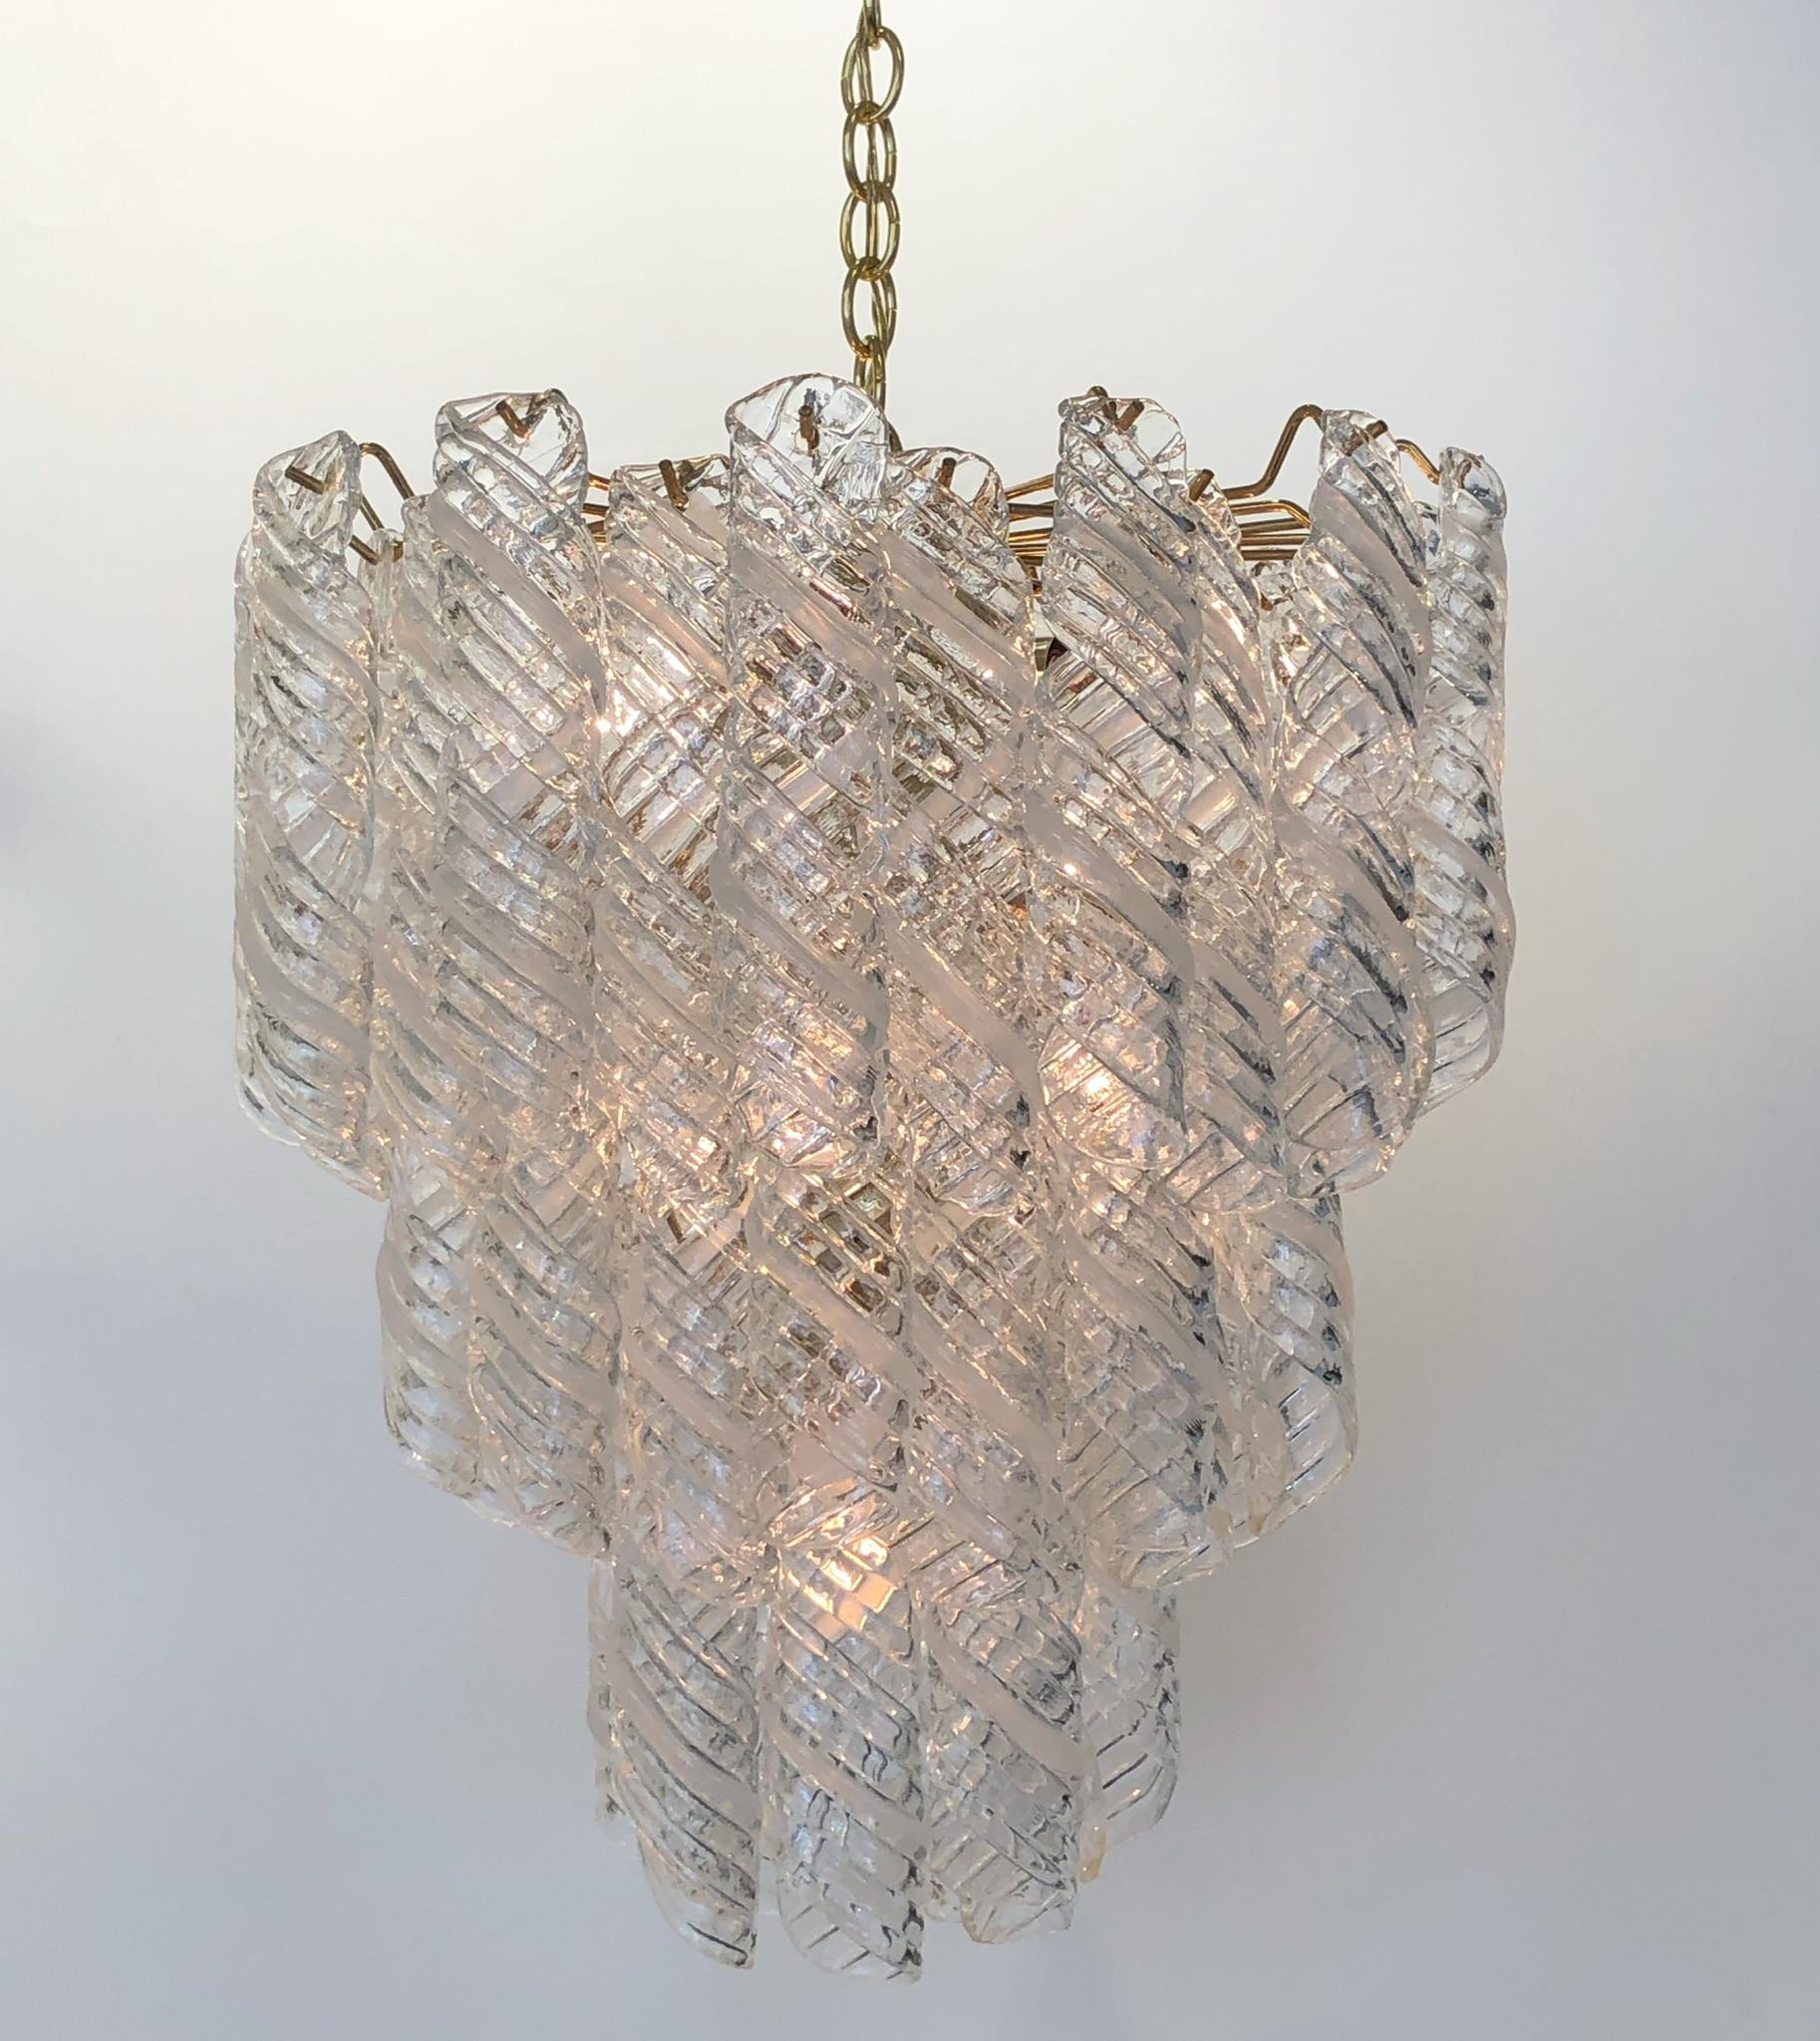 A glamorous 1970s Italian Murano glass and polish brass chandelier designed by Carlo Nason for Mazzega. Each piece of glass is handblown. The chandelier has been newly rewired. The chandelier takes six regular Edison light bulbs. We can extend the